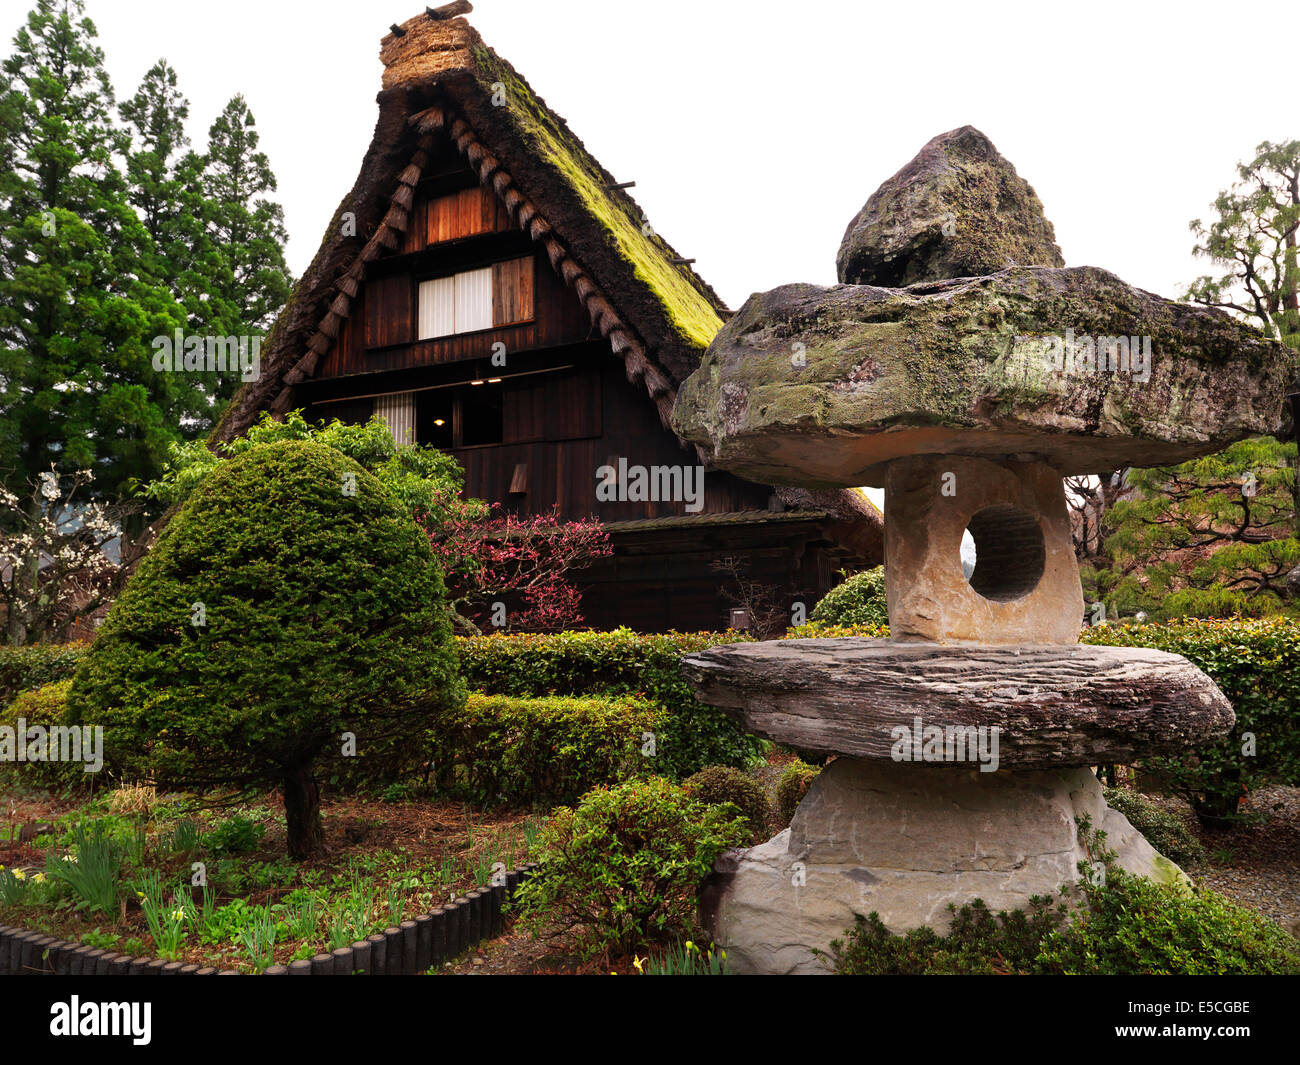 License available at MaximImages.com - Historic Japanese architecture at Gero Onsen Gassho Village, Gifu Prefecture, Japan Stock Photo